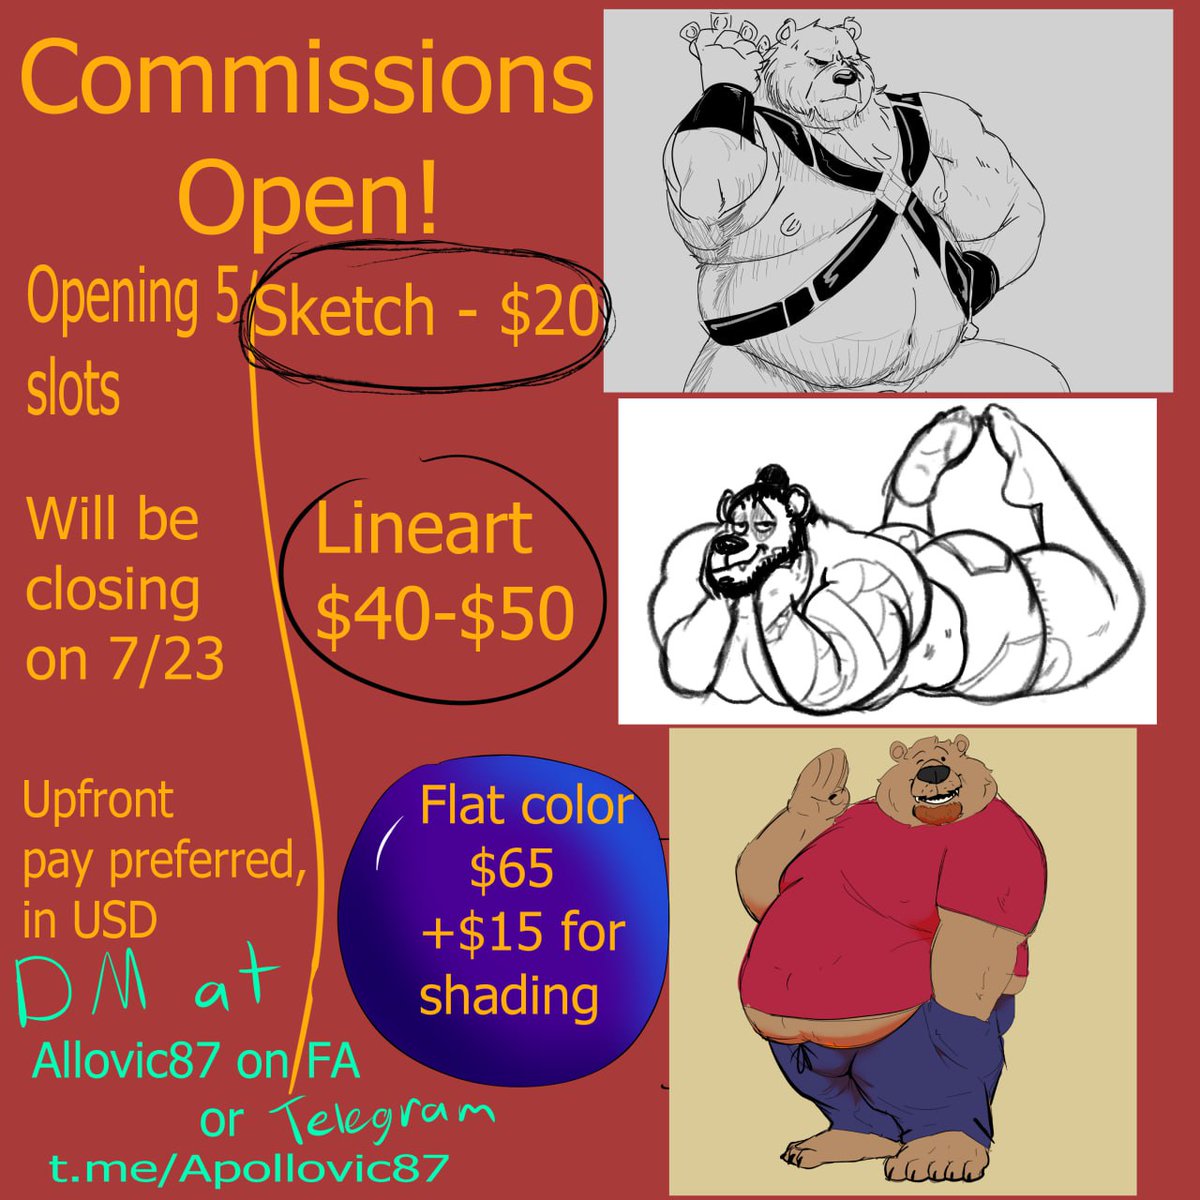 I'm gonna open up for commissions if anyone's interested, dm at @Apollovic87 on telegram or Allovic87 on FA At the moment, 4 Slots are available!